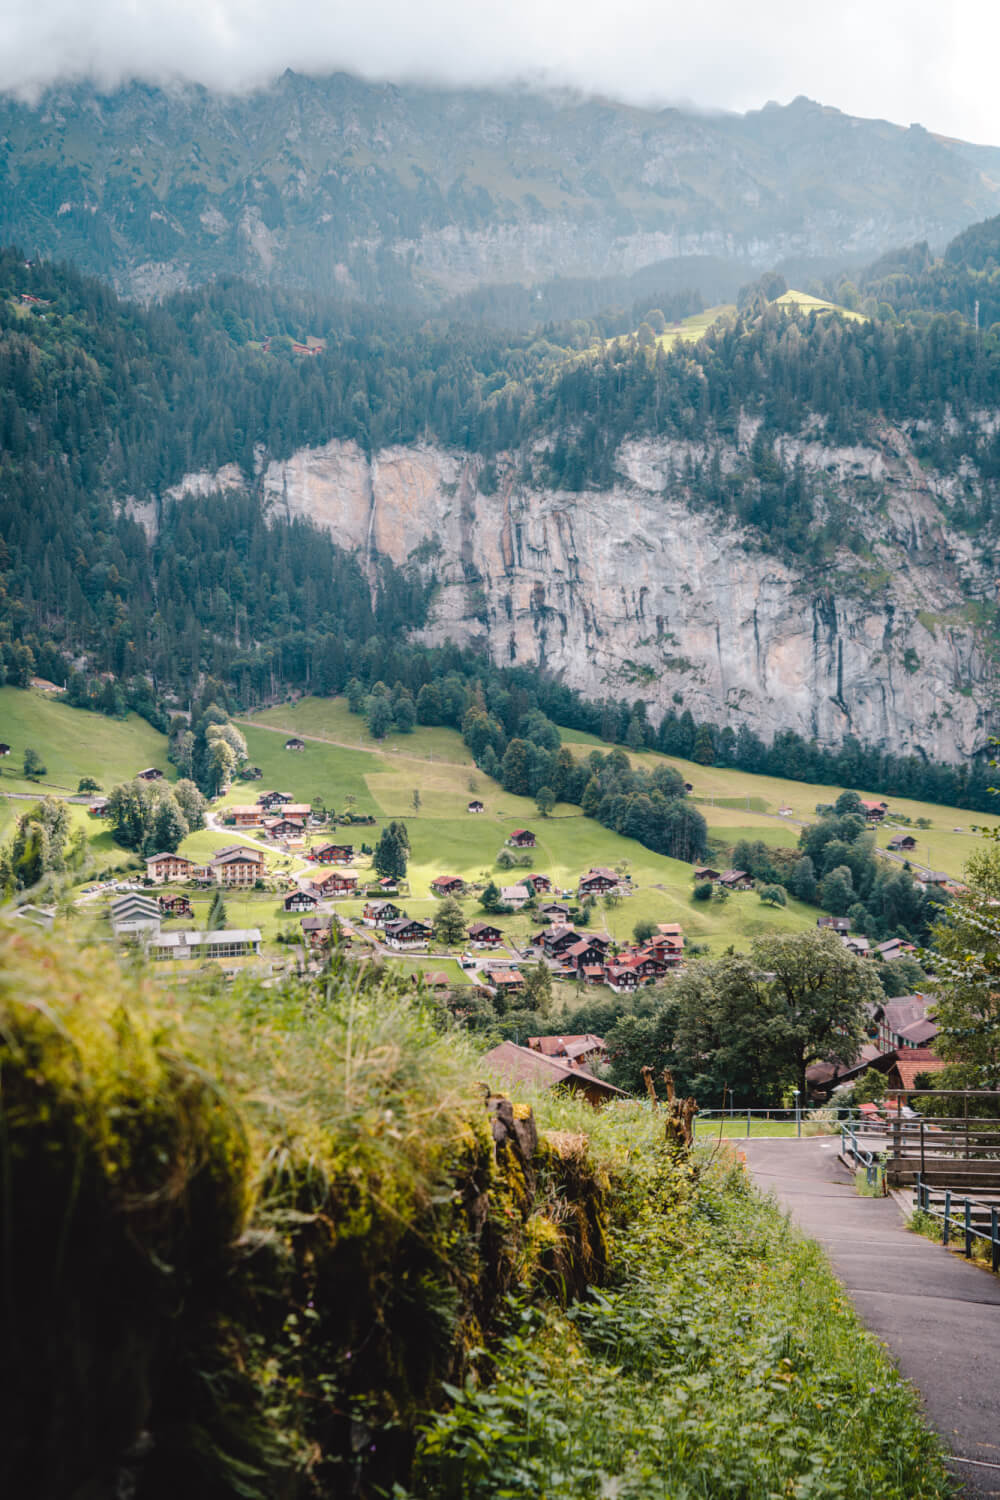 Gorgeous view over Lauterbrunnen Valley while hiking up to Mürren.